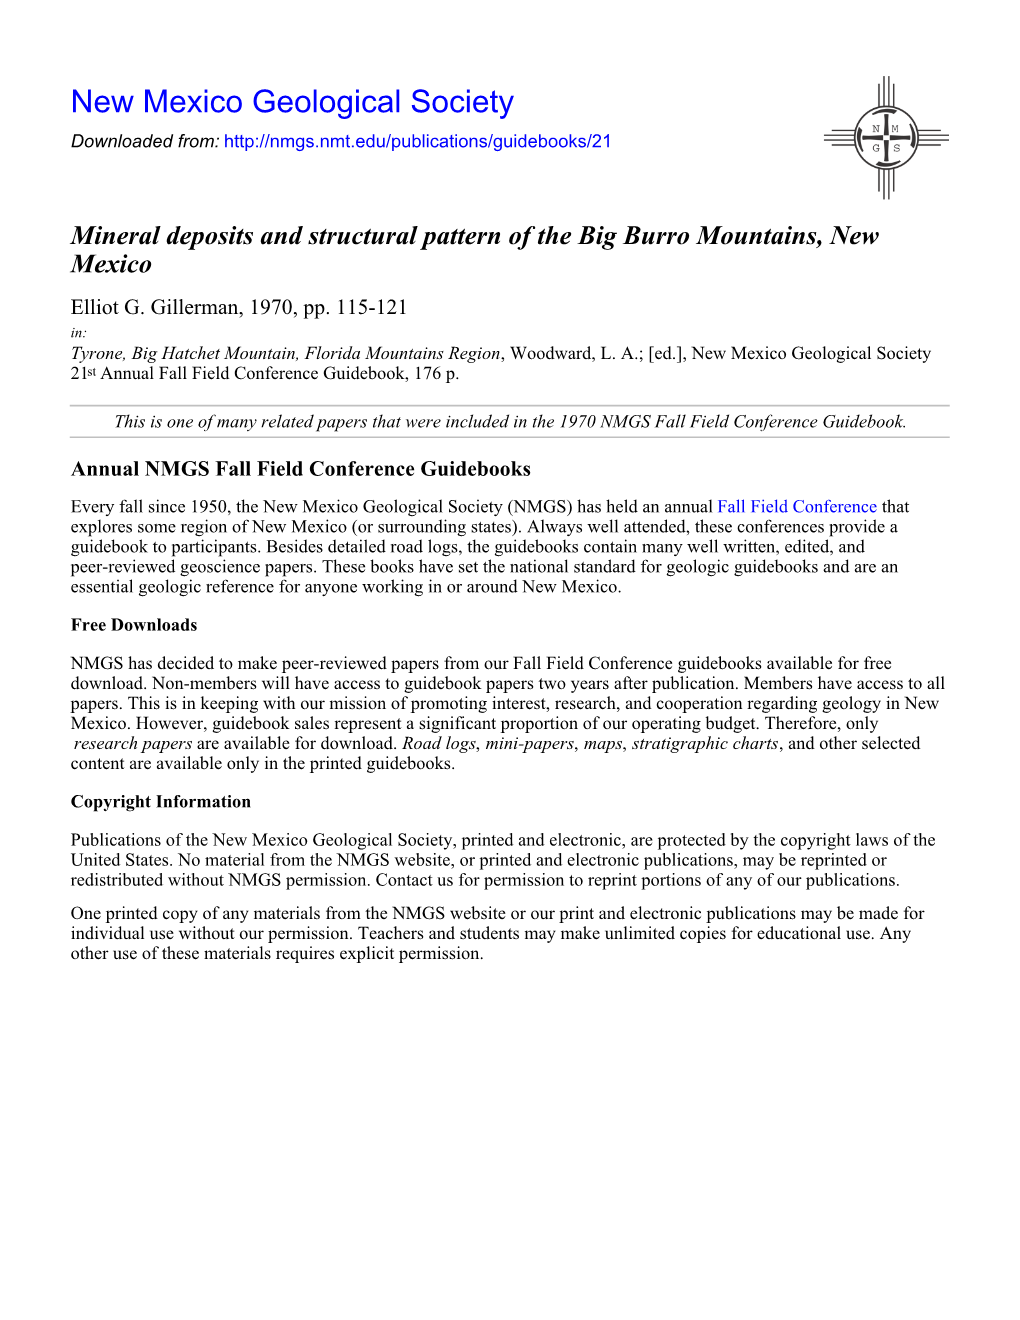 Mineral Deposits and Structural Pattern of the Big Burro Mountains, New Mexico Elliot G